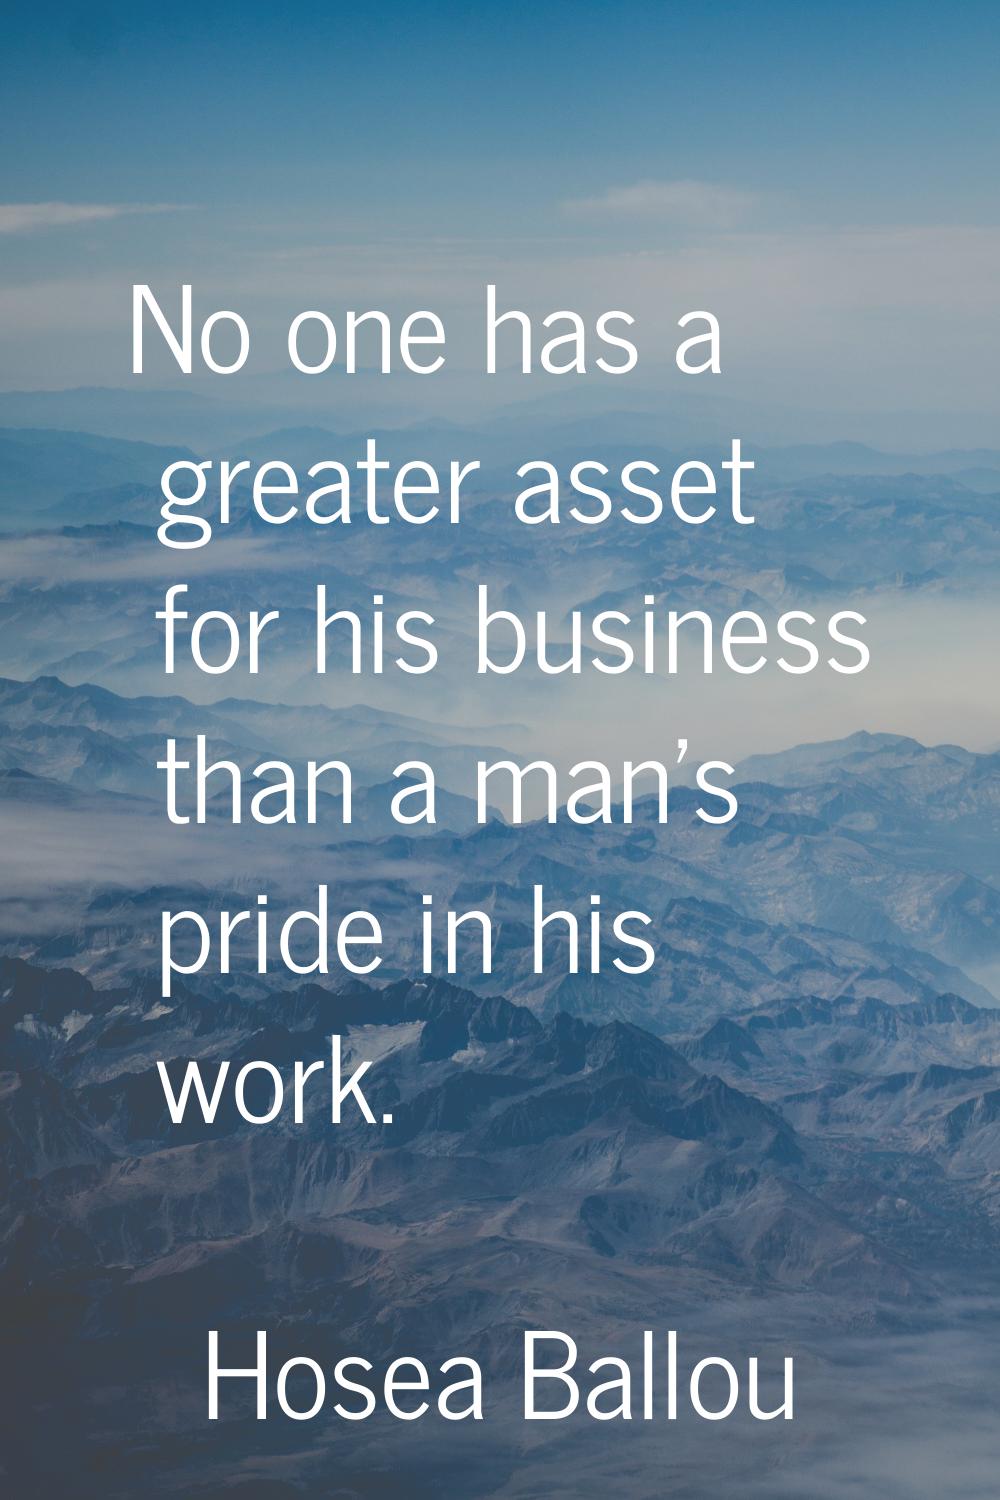 No one has a greater asset for his business than a man's pride in his work.